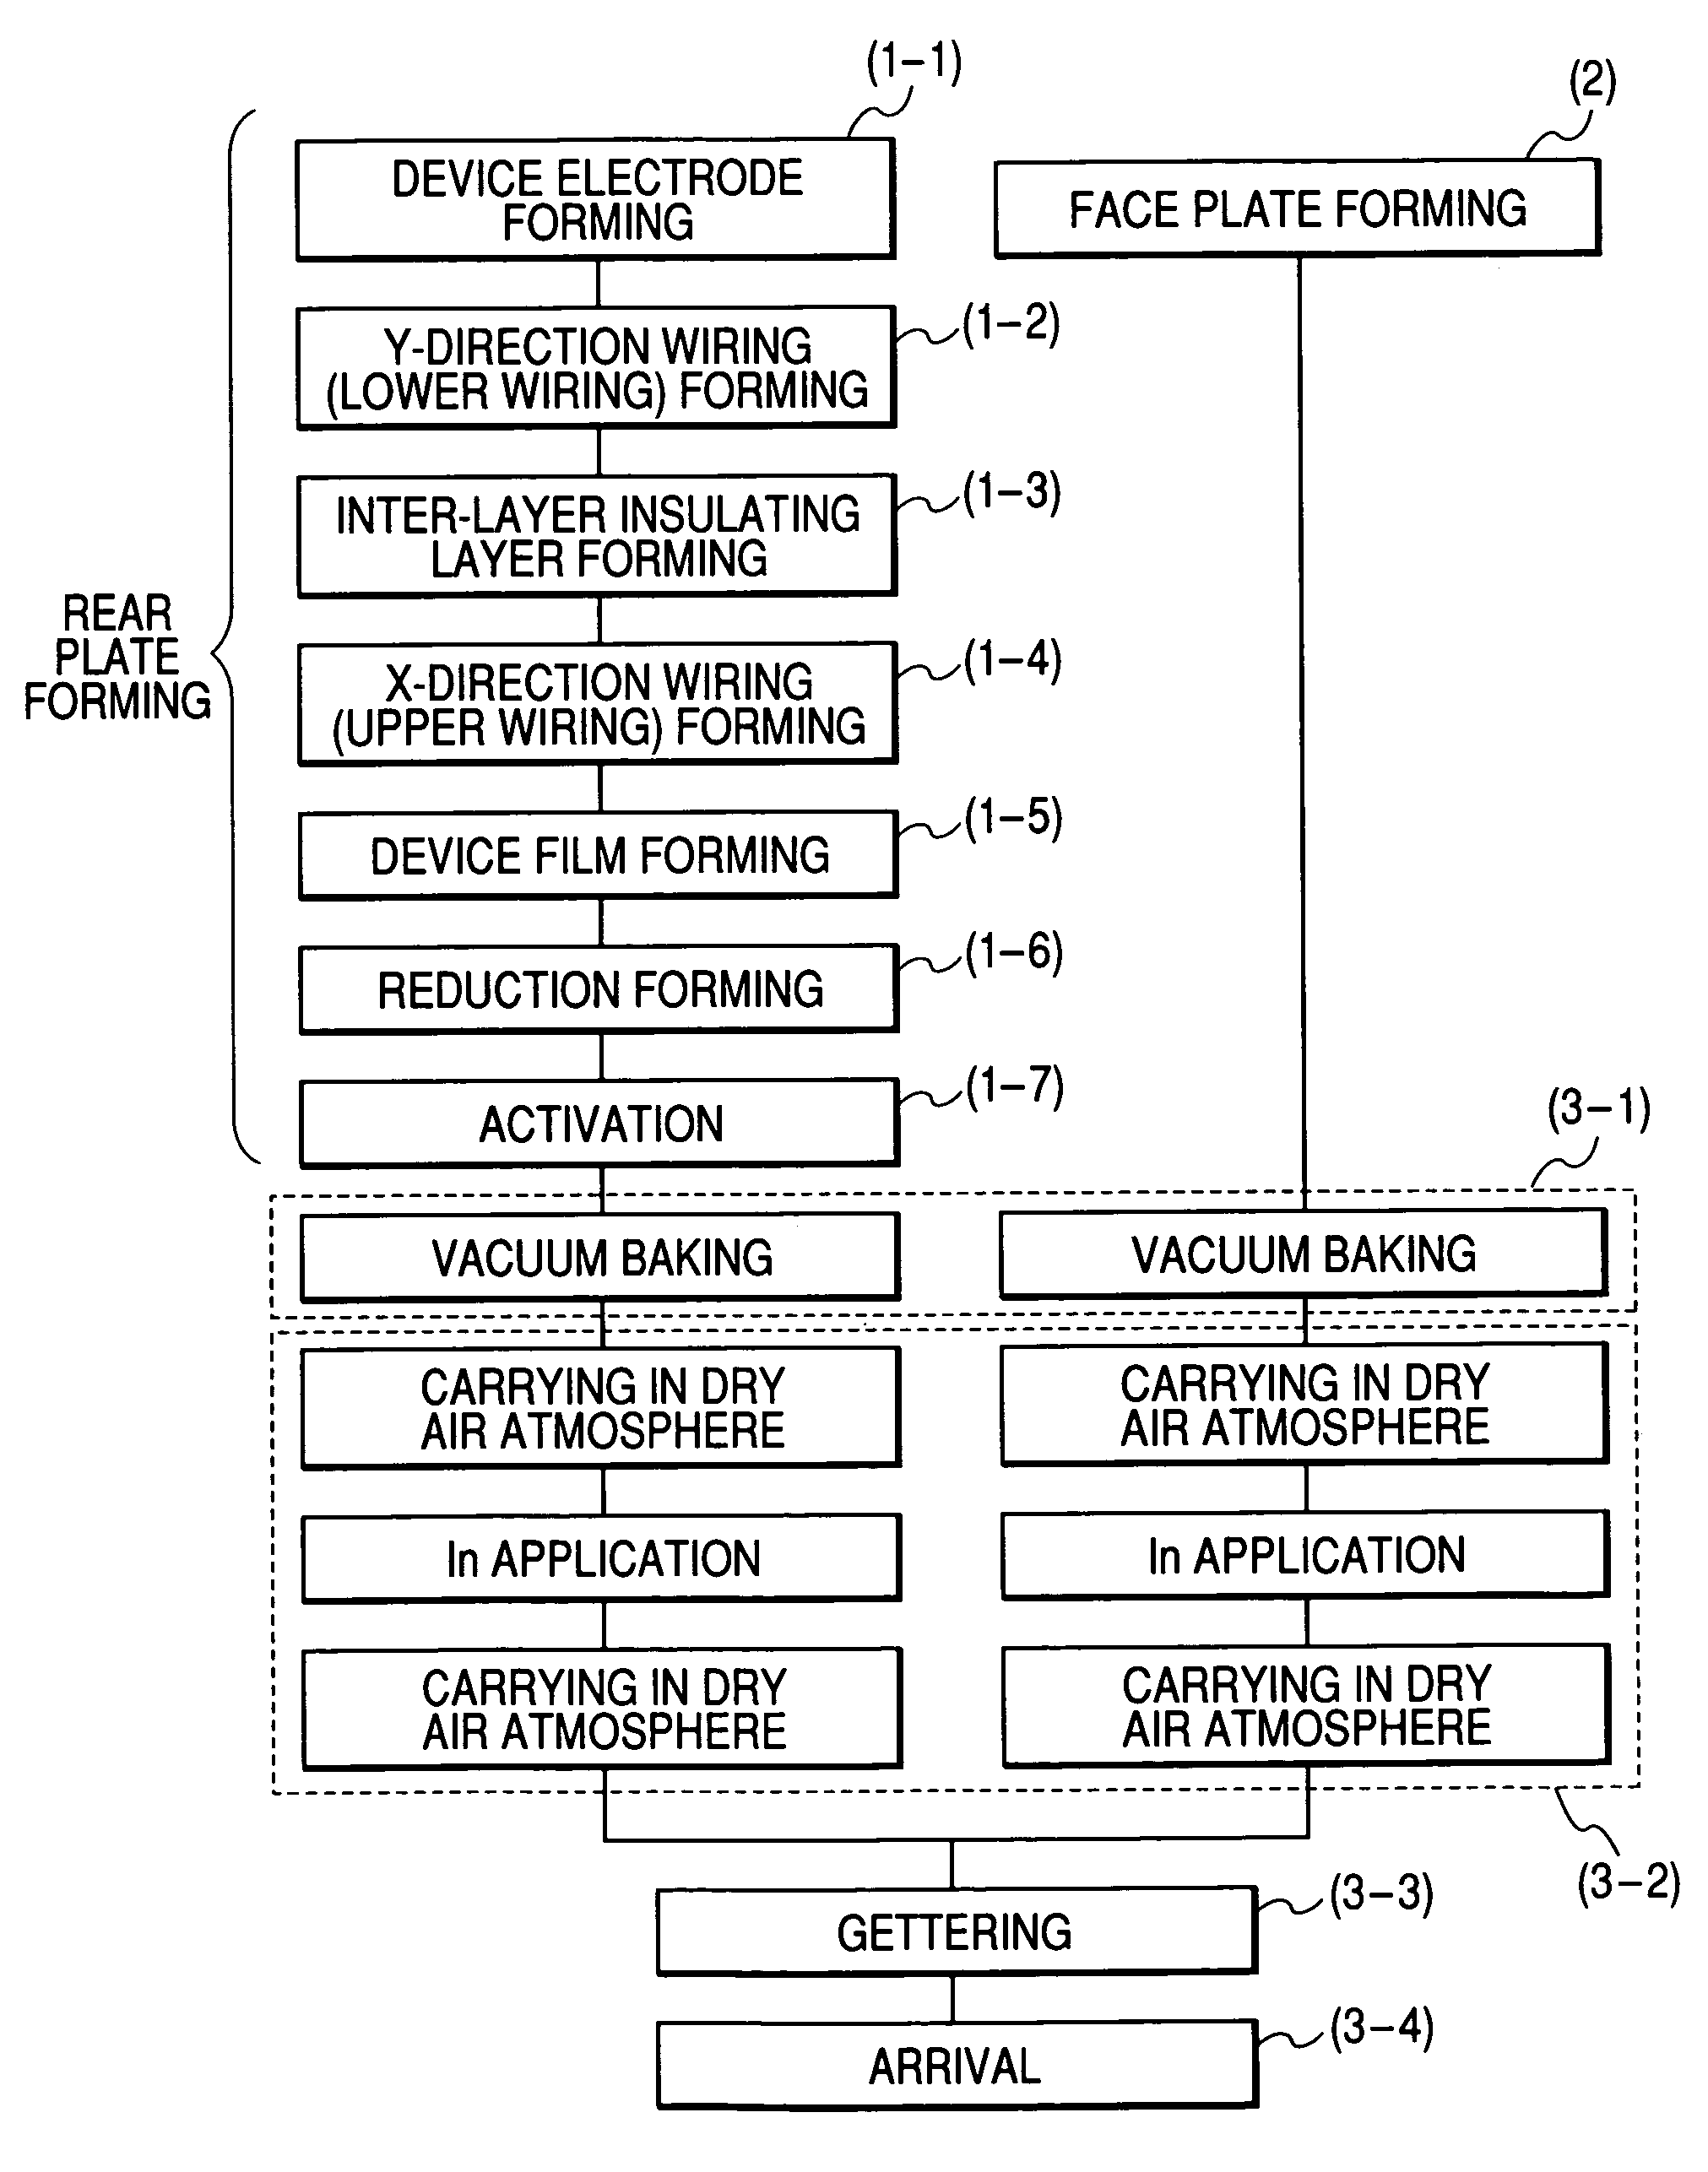 Method for fabricating envelope and method for fabricating image display apparatus